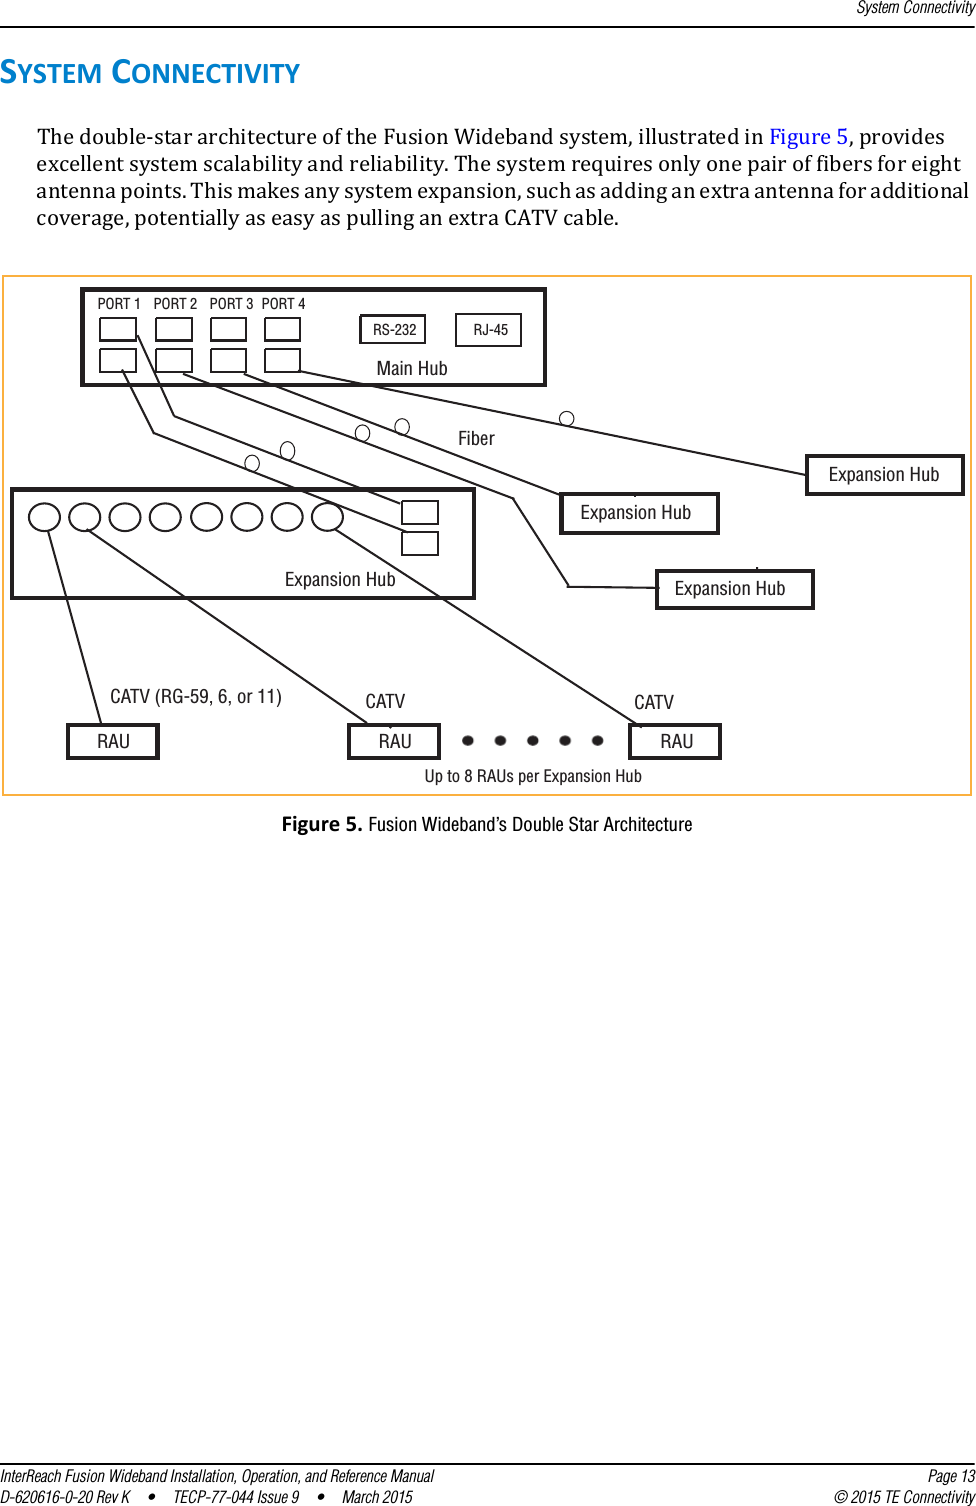 System ConnectivityInterReach Fusion Wideband Installation, Operation, and Reference Manual Page 13D-620616-0-20 Rev K  •  TECP-77-044 Issue 9  •  March 2015 © 2015 TE ConnectivitySYSTEM CONNECTIVITYThe double-star architecture of the Fusion Wideband system, illustrated in Figure 5, provides excellent system scalability and reliability. The system requires only one pair of fibers for eight antenna points. This makes any system expansion, such as adding an extra antenna for additional coverage, potentially as easy as pulling an extra CATV cable.Figure 5. Fusion Wideband’s Double Star ArchitecturePORT 1 PORT 2 PORT 3 PORT 4RS-232 RJ-45RAU RAU RAUExpansion HubMain HubExpansion HubExpansion HubExpansion HubFiberCATV (RG-59, 6, or 11) CATV CATVUp to 8 RAUs per Expansion Hub